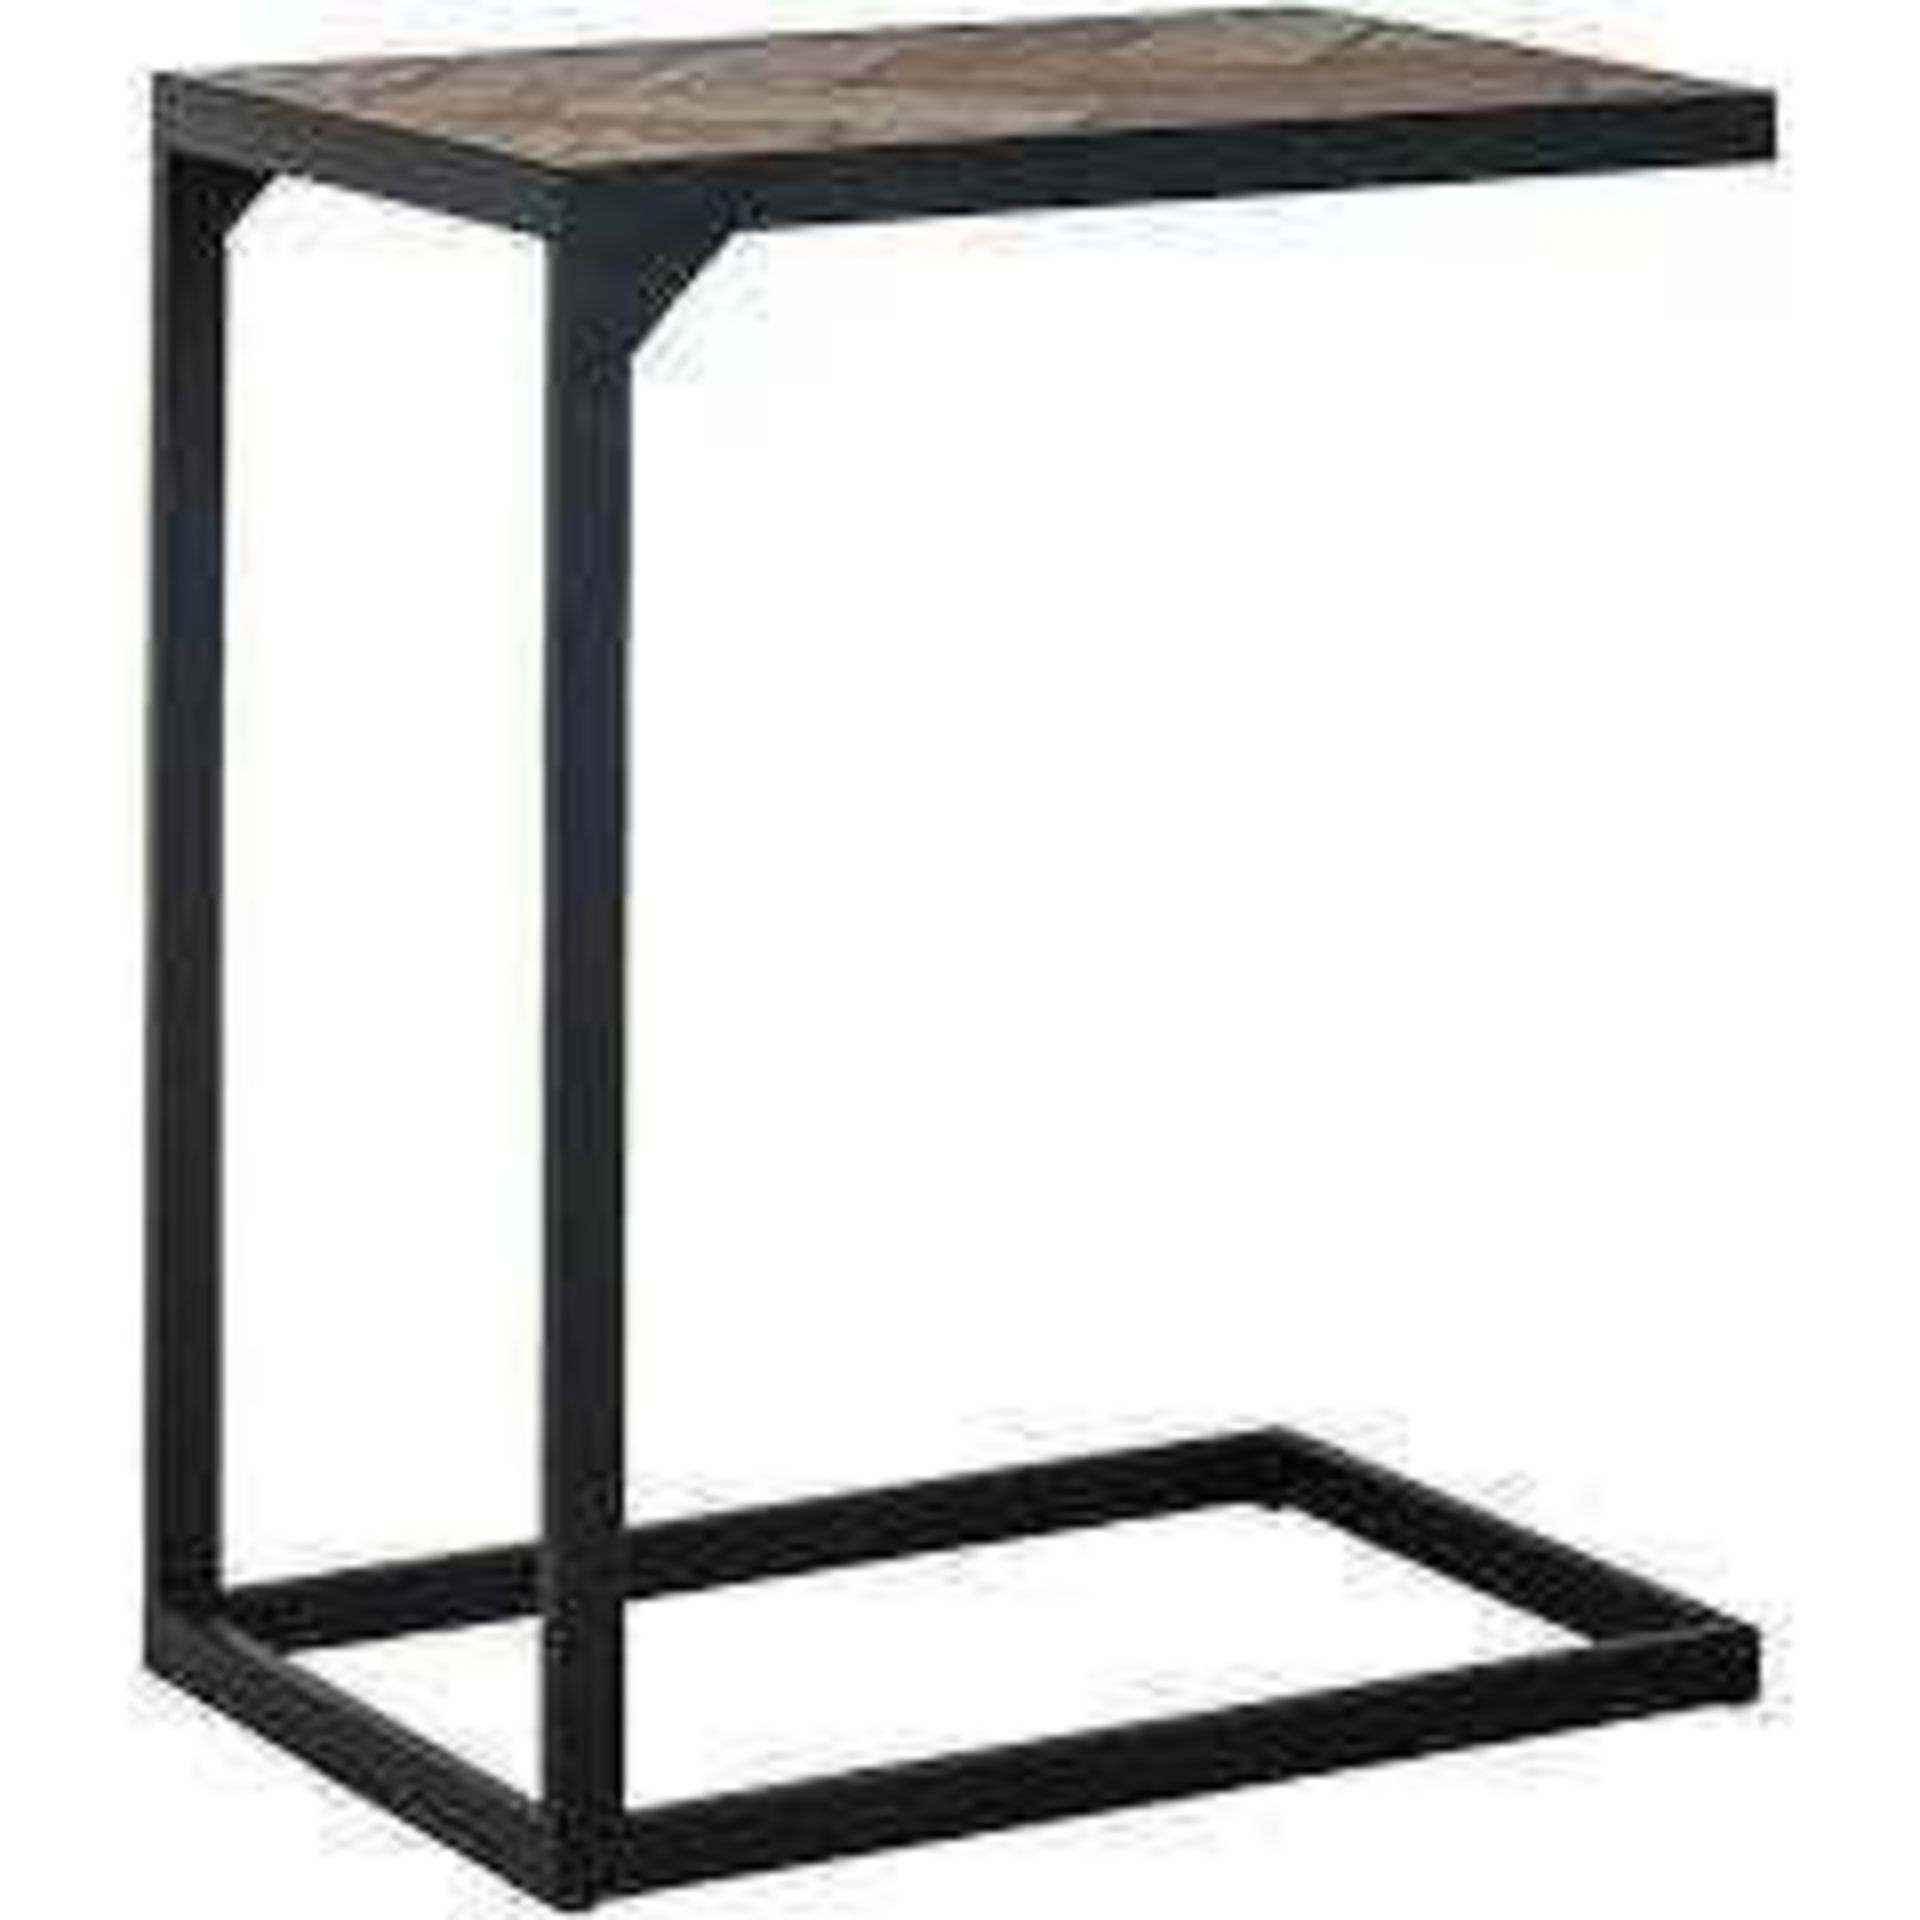 RRP £100 Platform Modular Garden Side Table (Appraisals Are Available On Request) (Pictures For